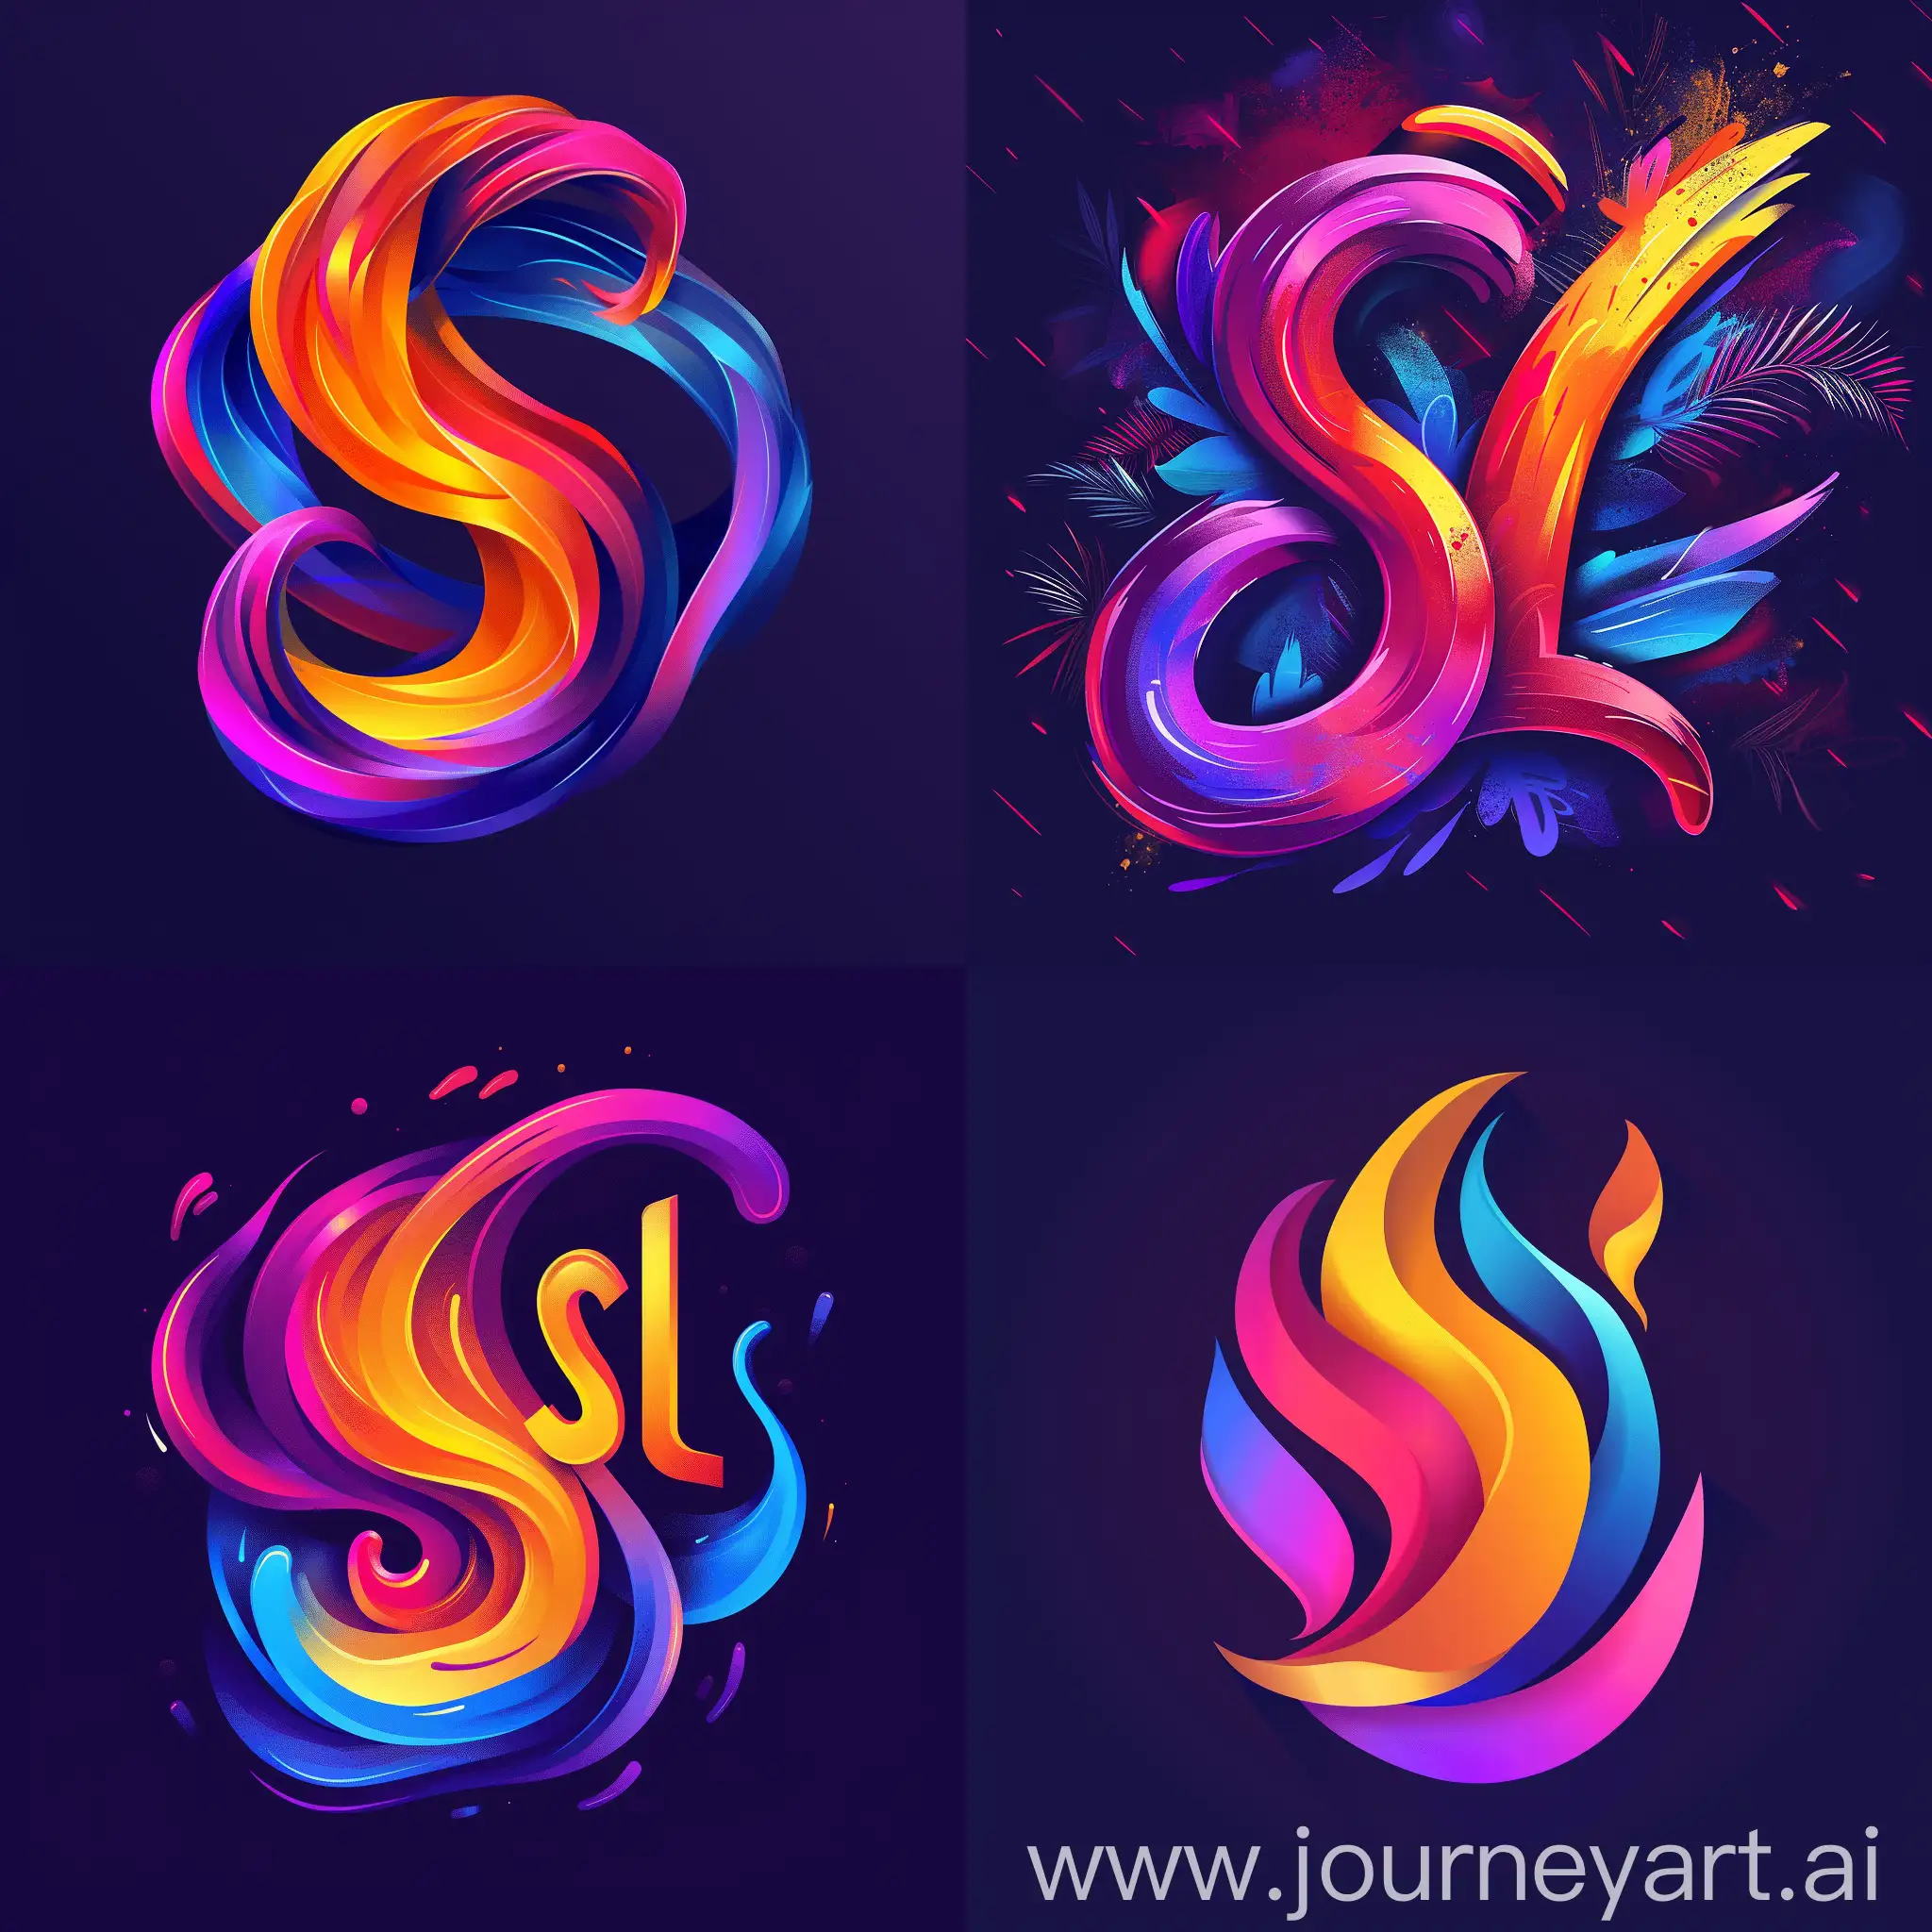 Vibrant-Logo-Design-SL-with-Abstract-Forms-and-Bright-Colors